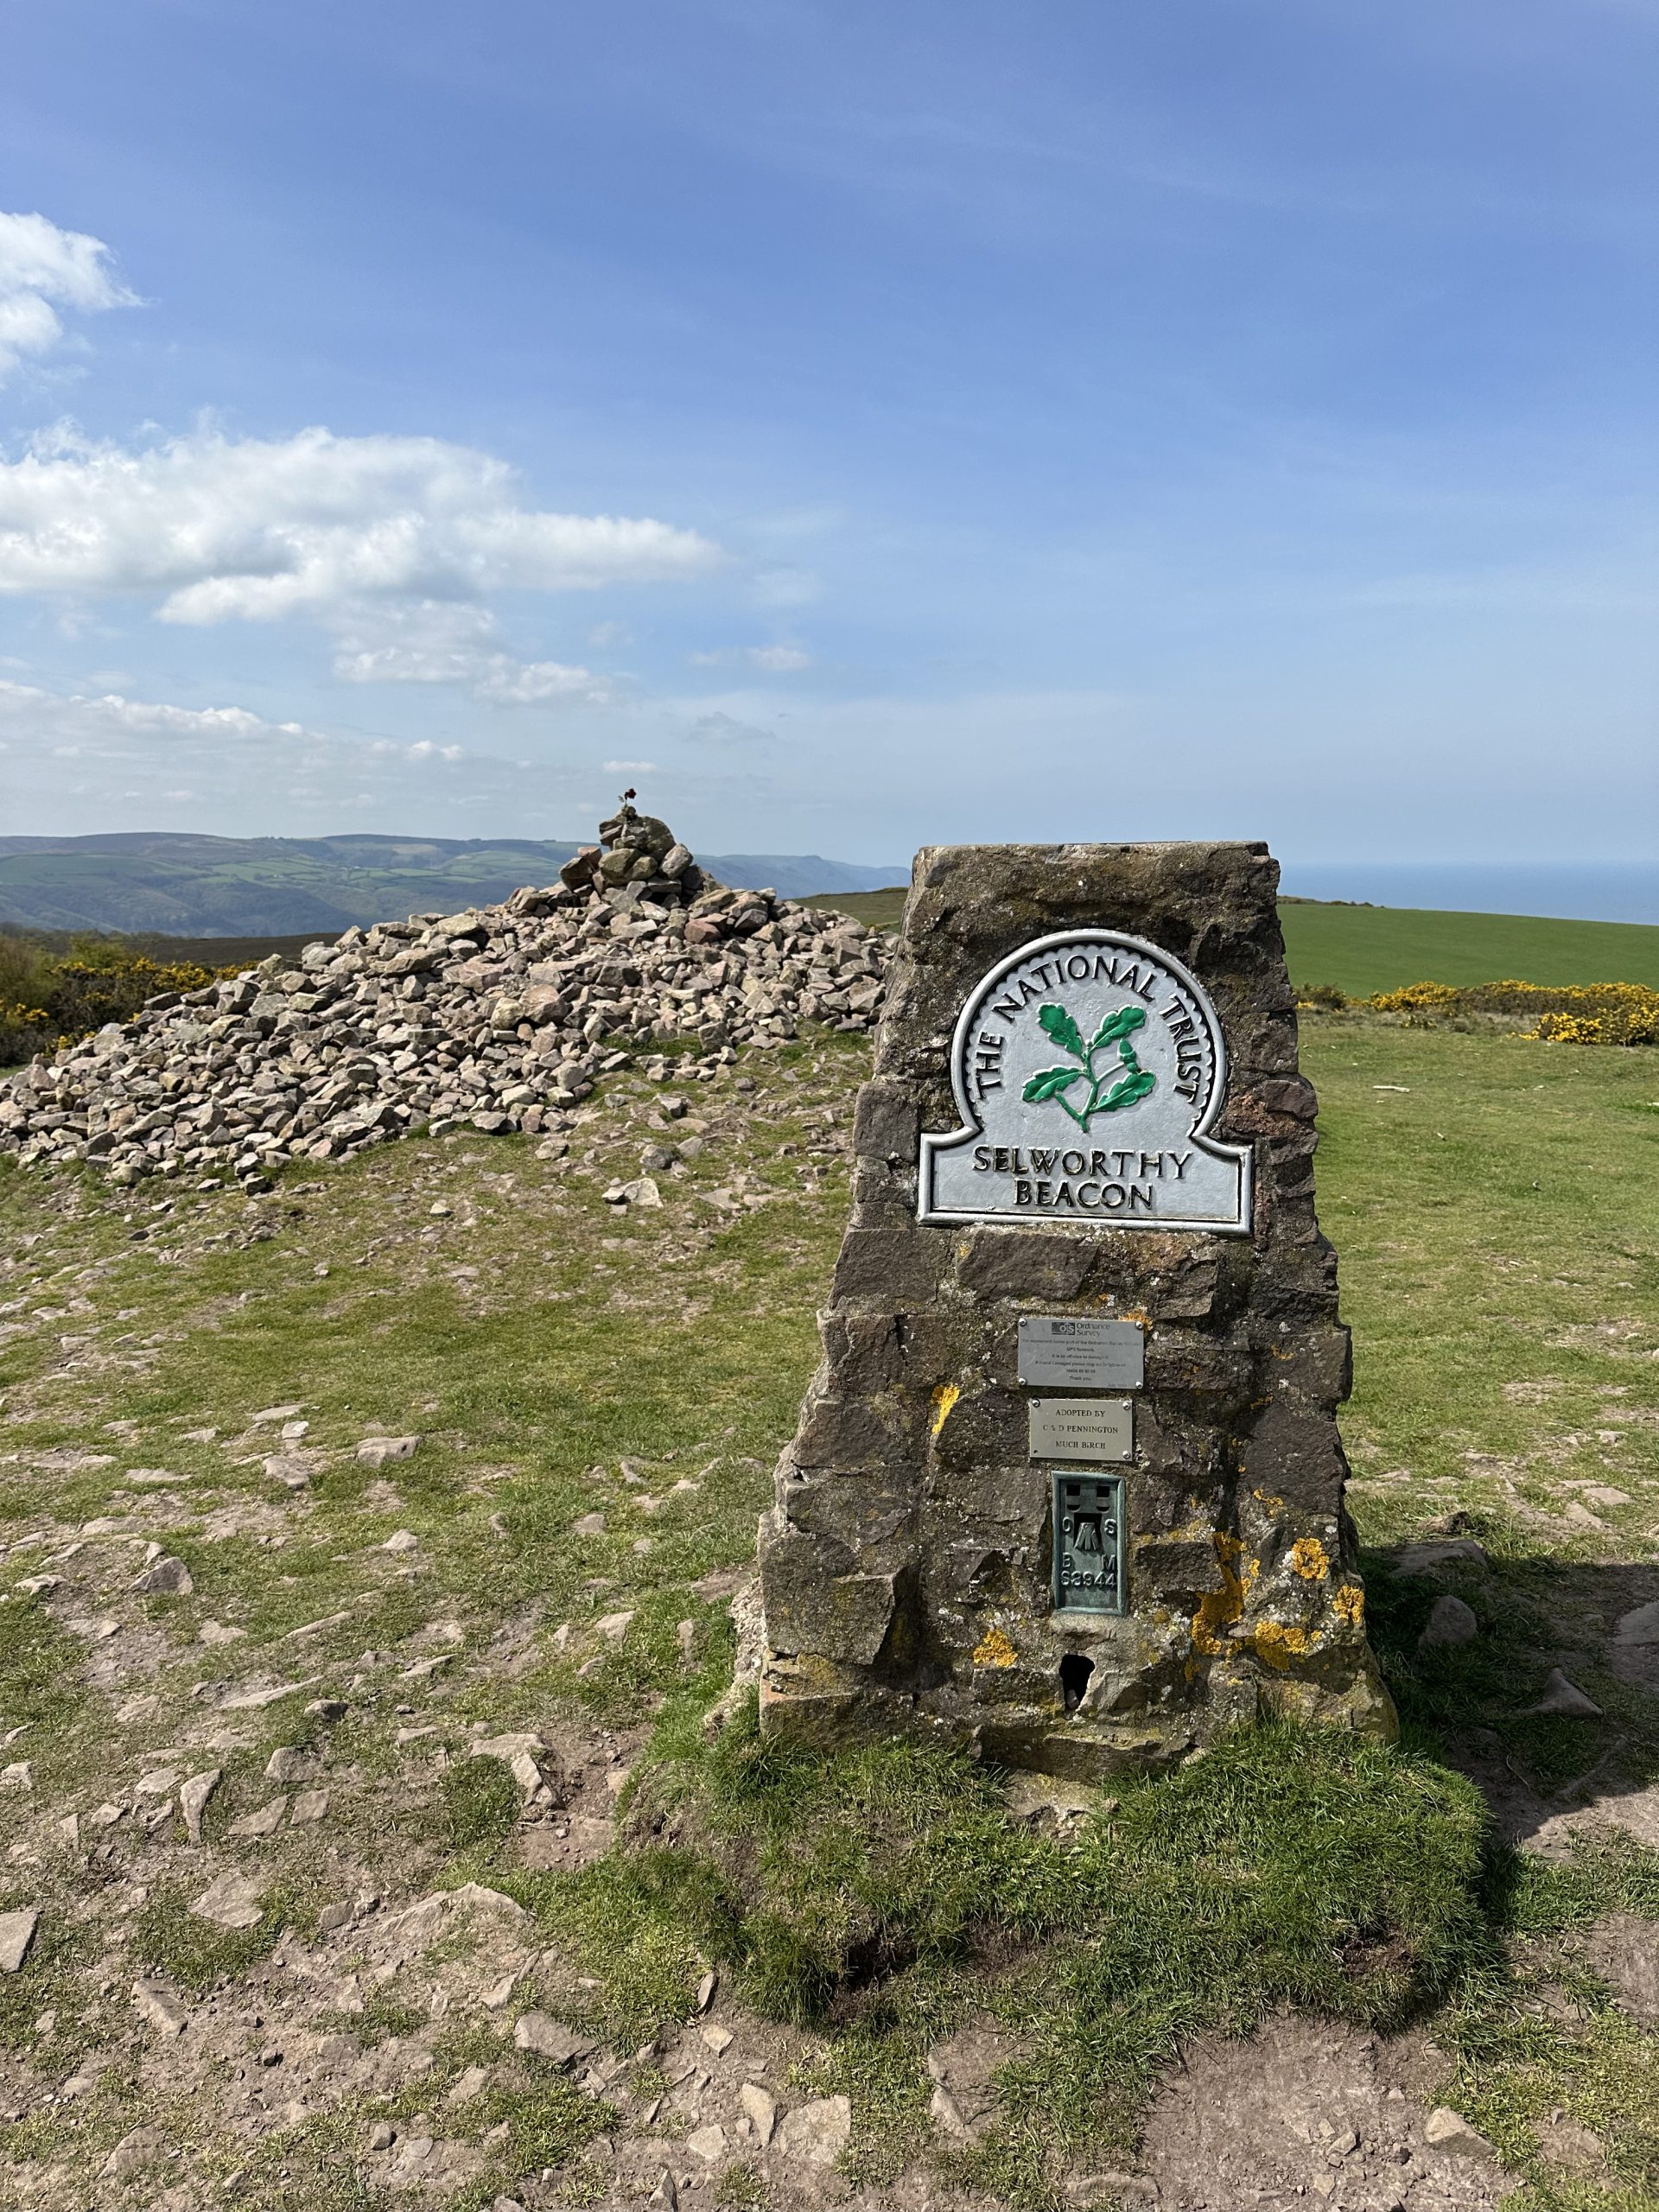 Selworthy Beacon - a rock tower with a National Trust plaque on it, in front of the view of Exmoor